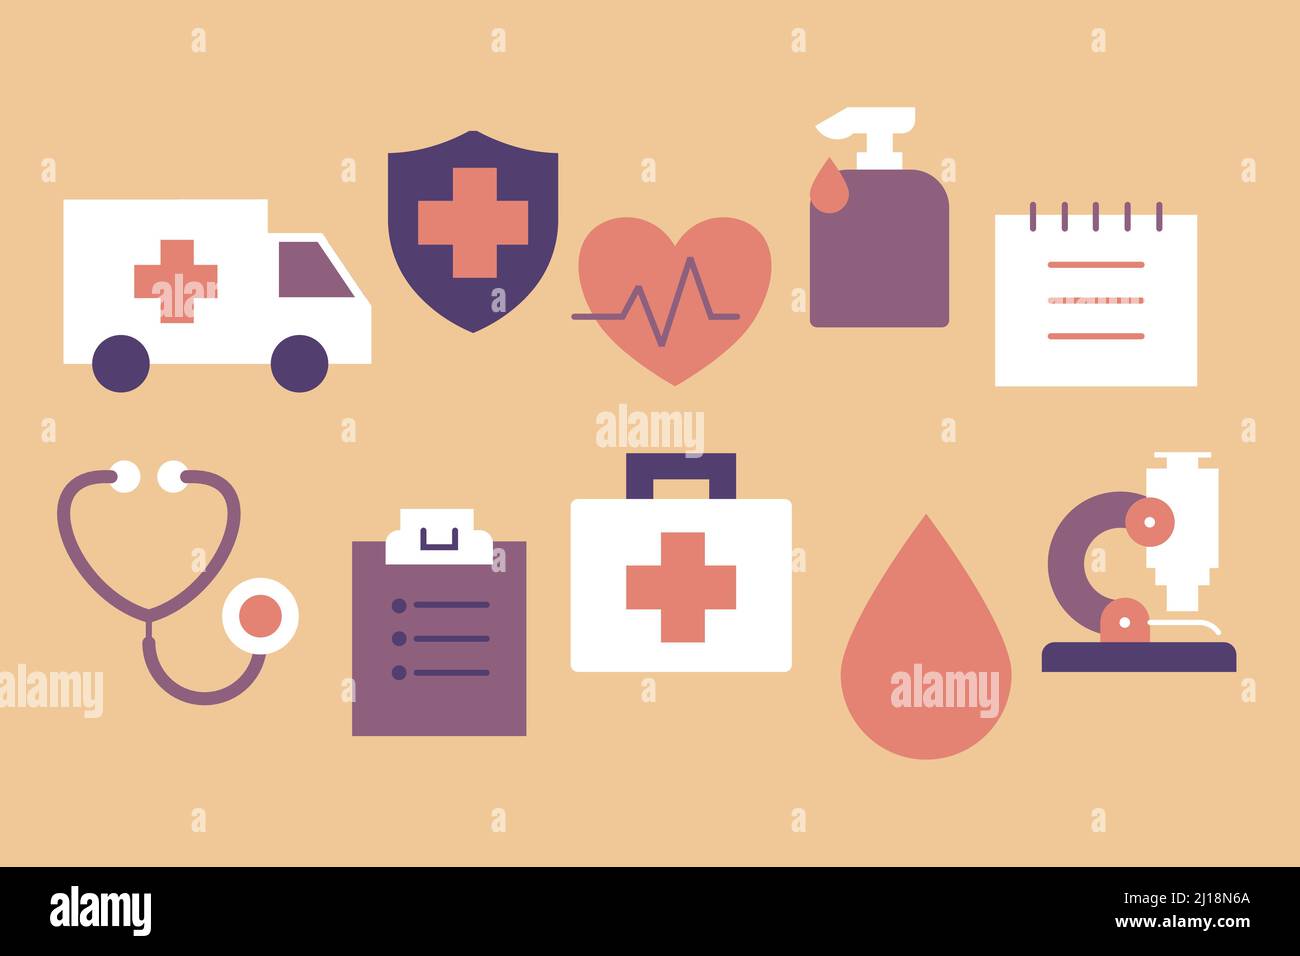 Collection of color cartoon medical icons. Healthcare medicine icon set: ambulance, shield, heart, pulse, disinfectant, medical record, stethoscope. Stock Vector